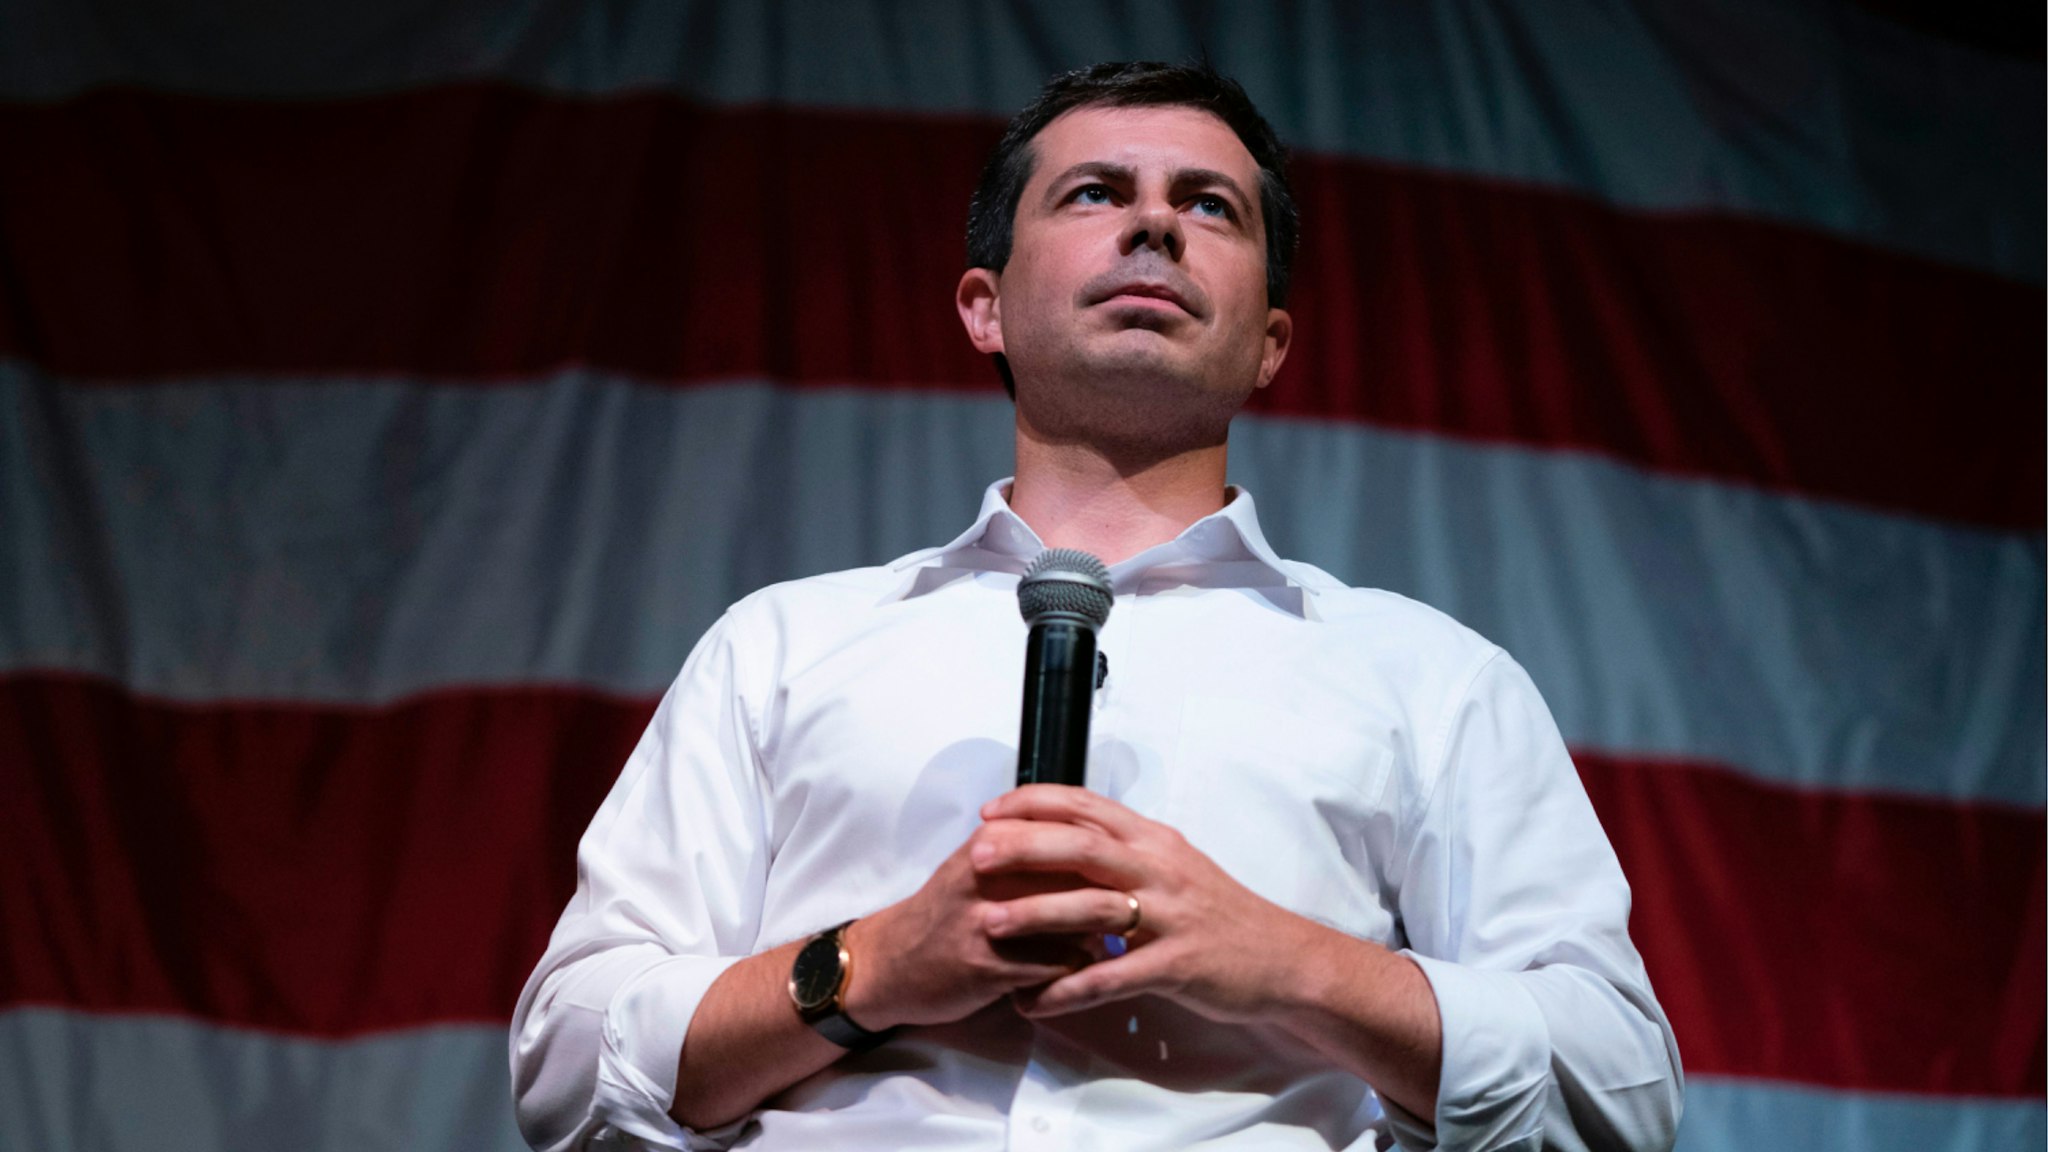 2020 Democratic presidential hopeful Mayor of South Bend, Indiana Pete Buttigieg speaks at the Wing Ding Dinner on August 9, 2019 in Clear Lake, Iowa.